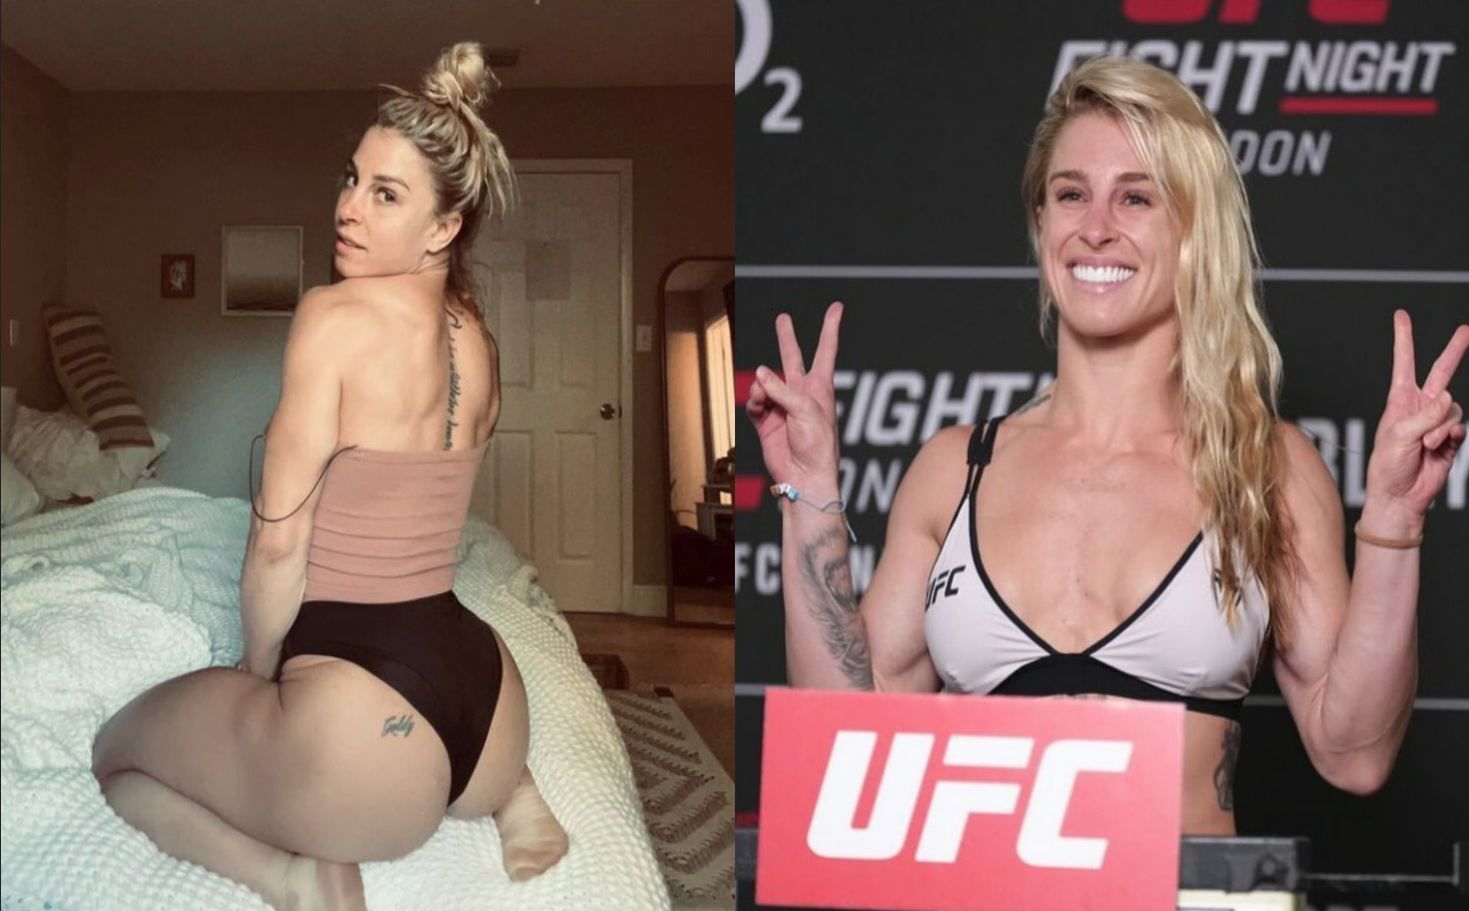 UFC fighter Goldy takes picture in lacy deep-cleavage bodysuit